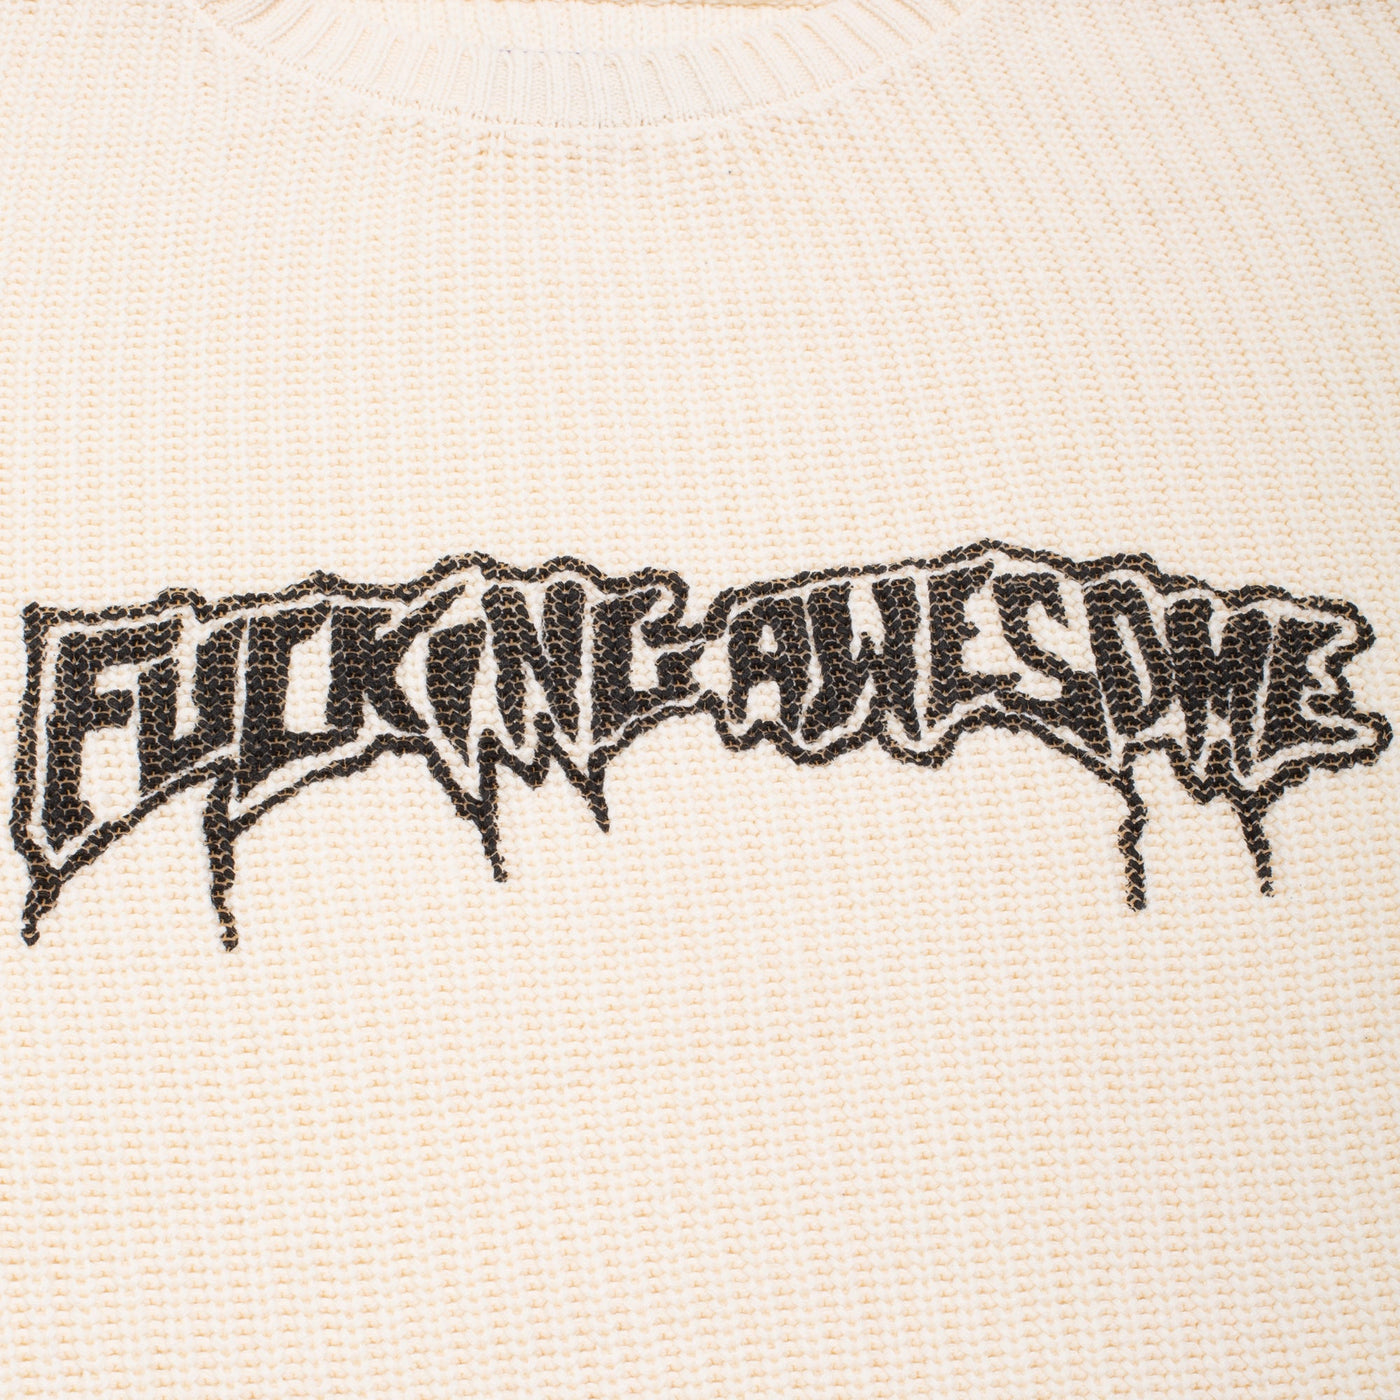 Drip Logo Knitted Sweater